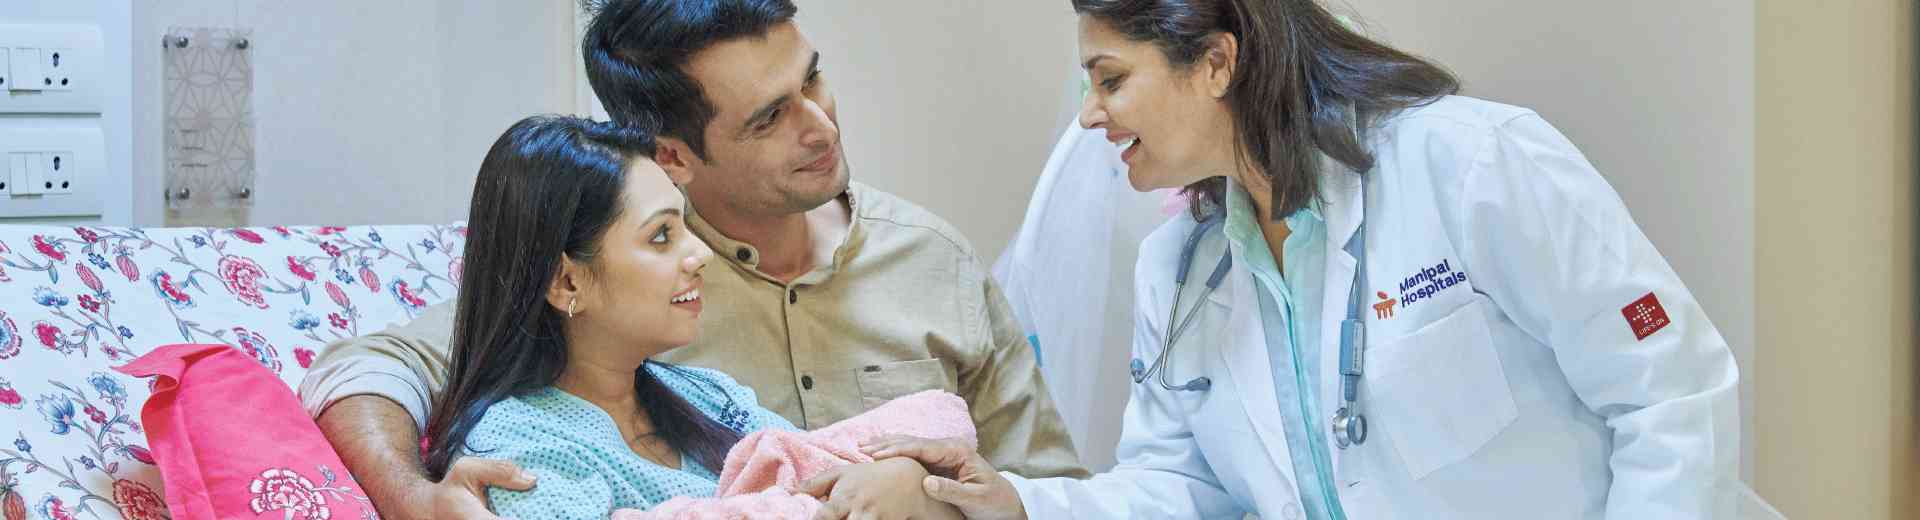 Clinical services offered at the Centre of Excellence in Paediatrics & Child Care in Gurugram